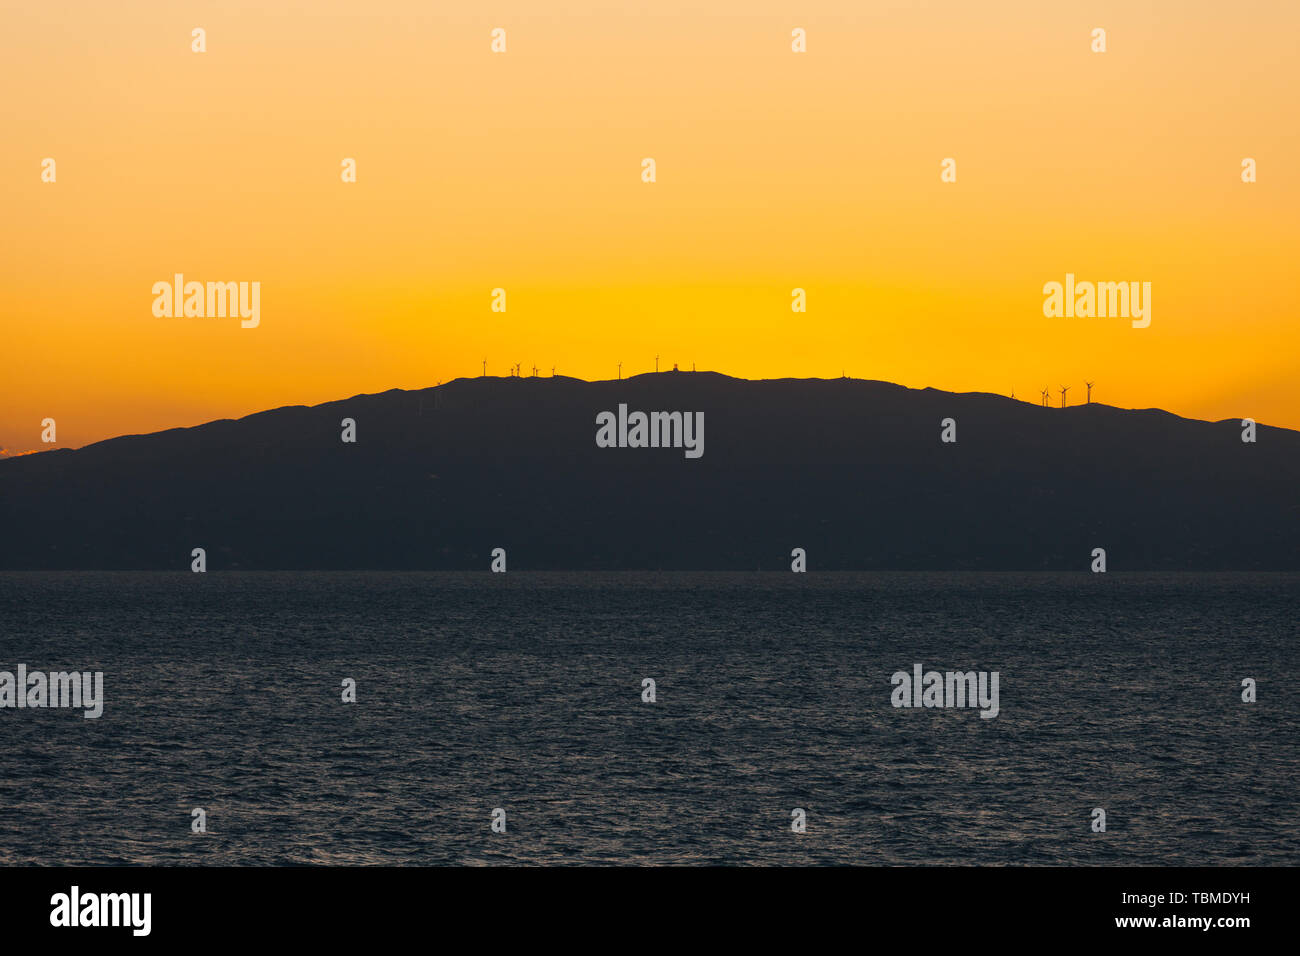 Sunset behind the profile of an island with wind turbines Stock Photo